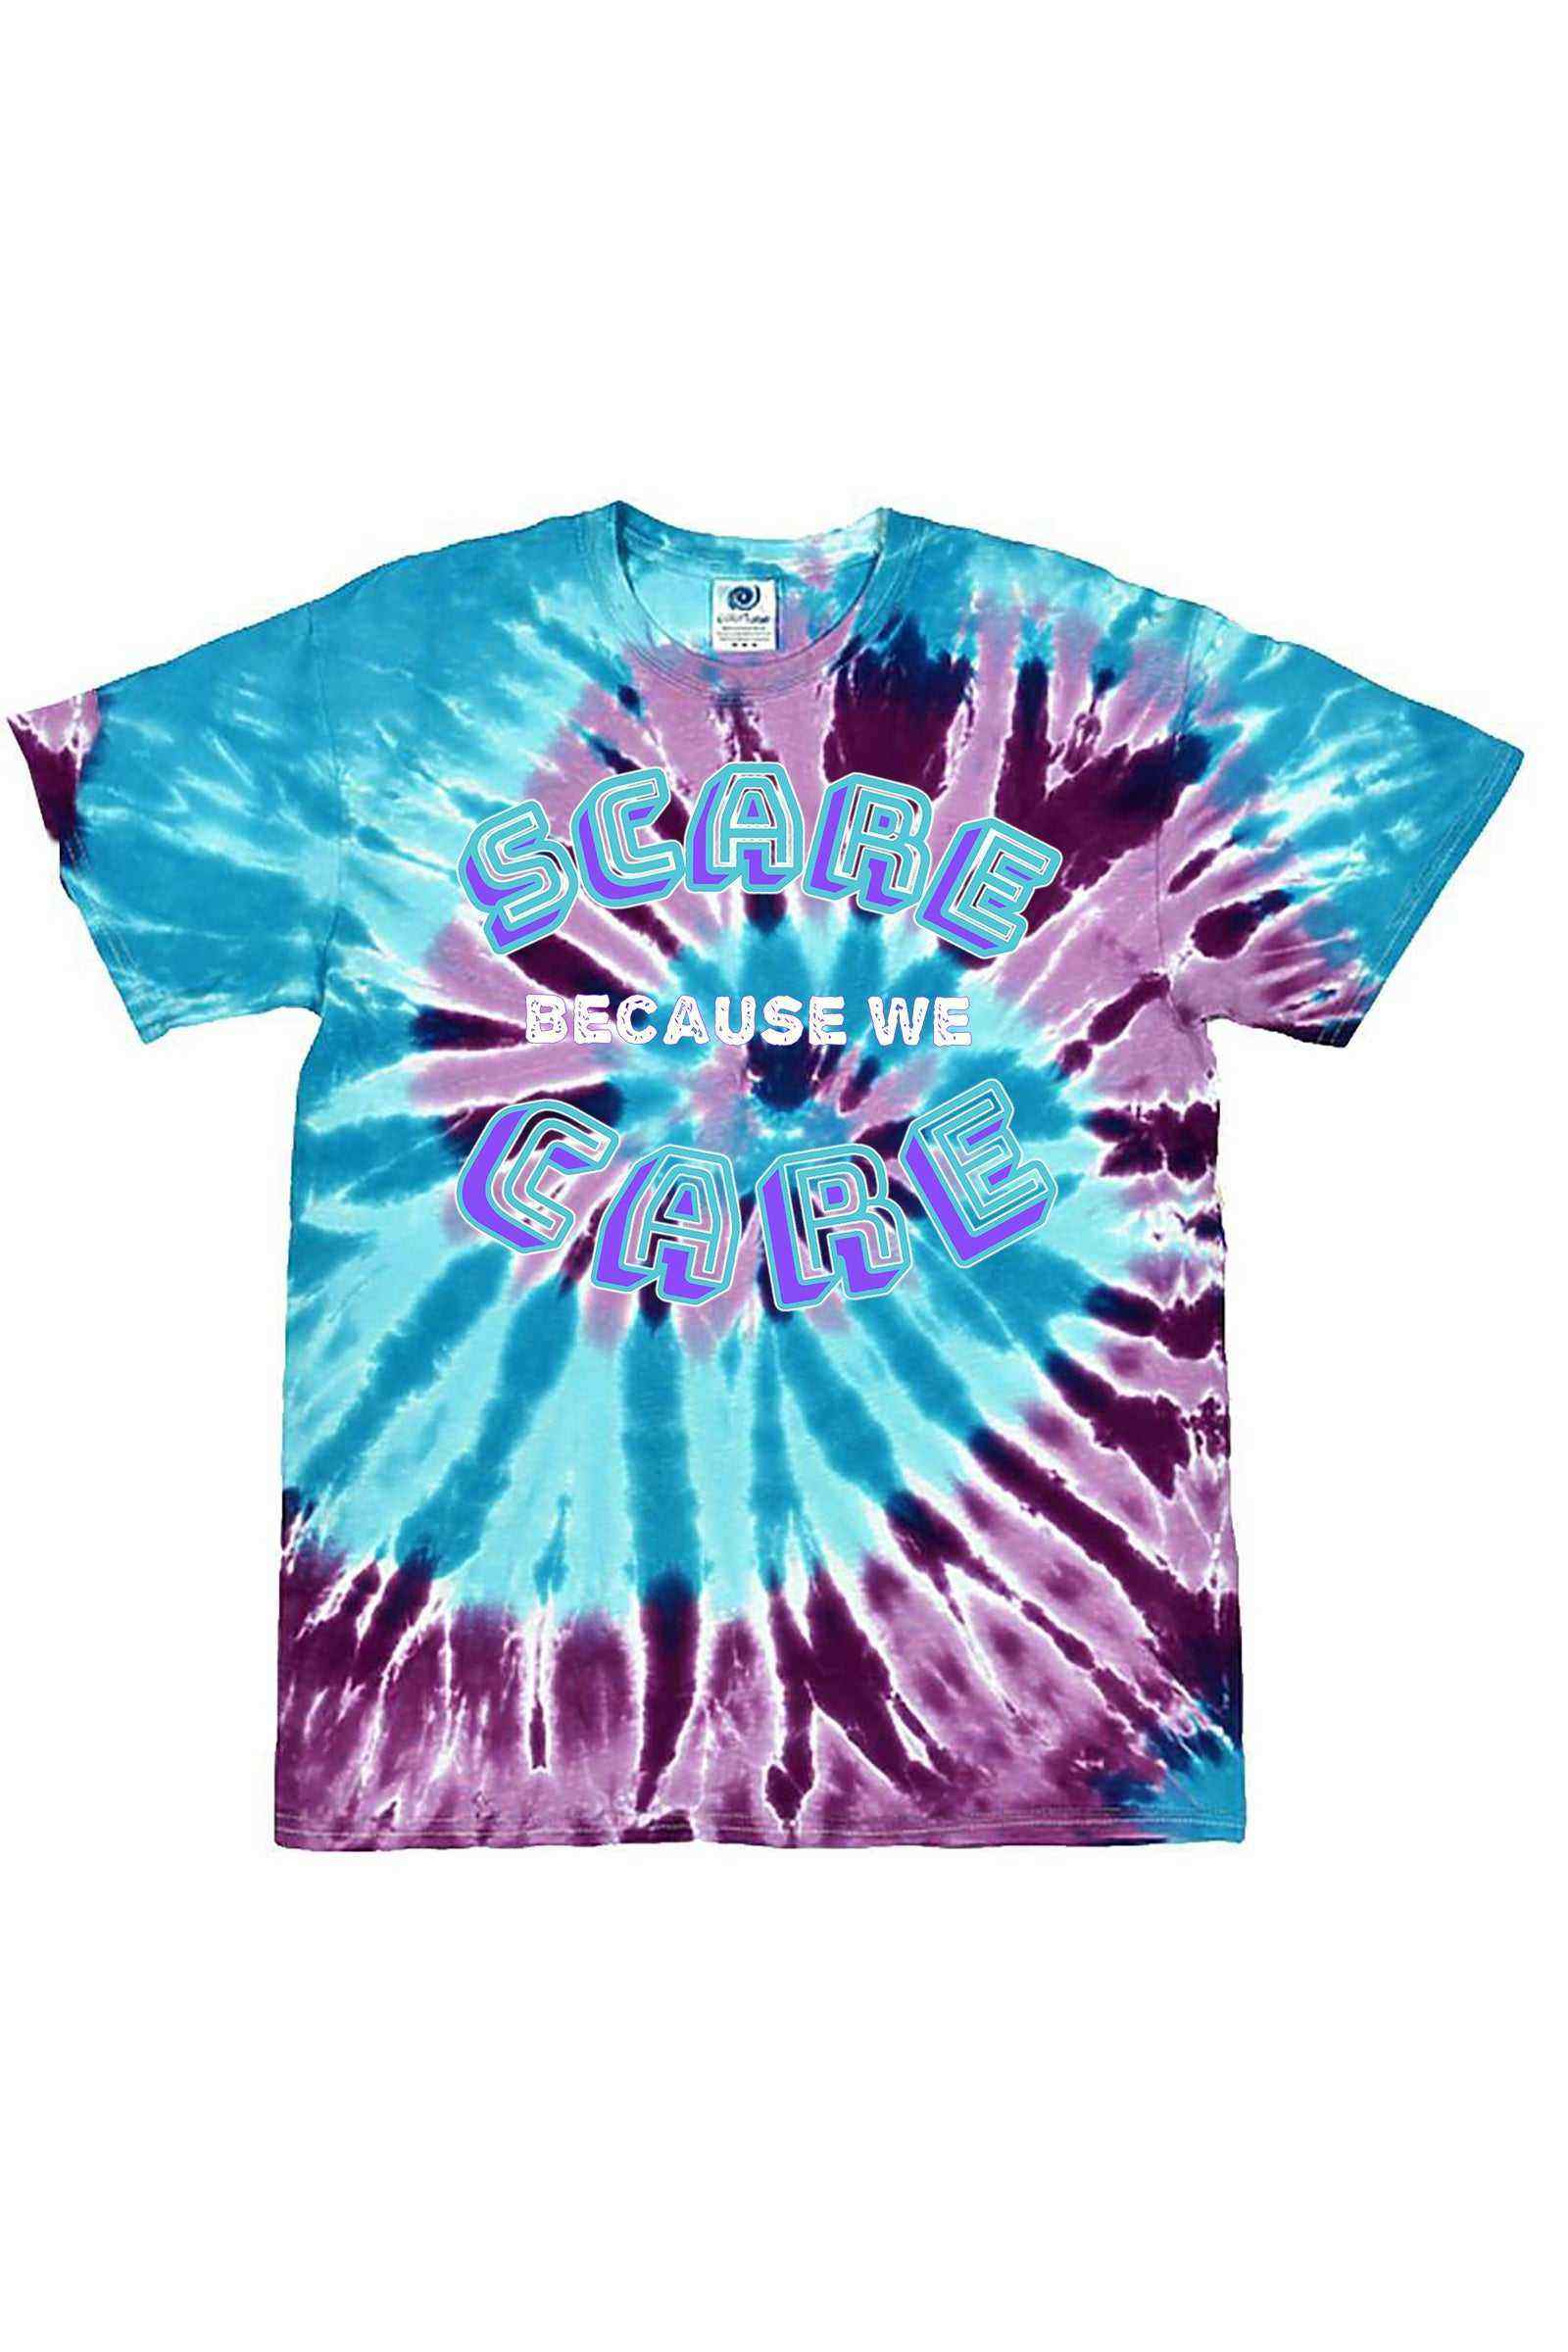 We Scare Because We Care Monsters Inc Tie-Dye - Dylan's Tees